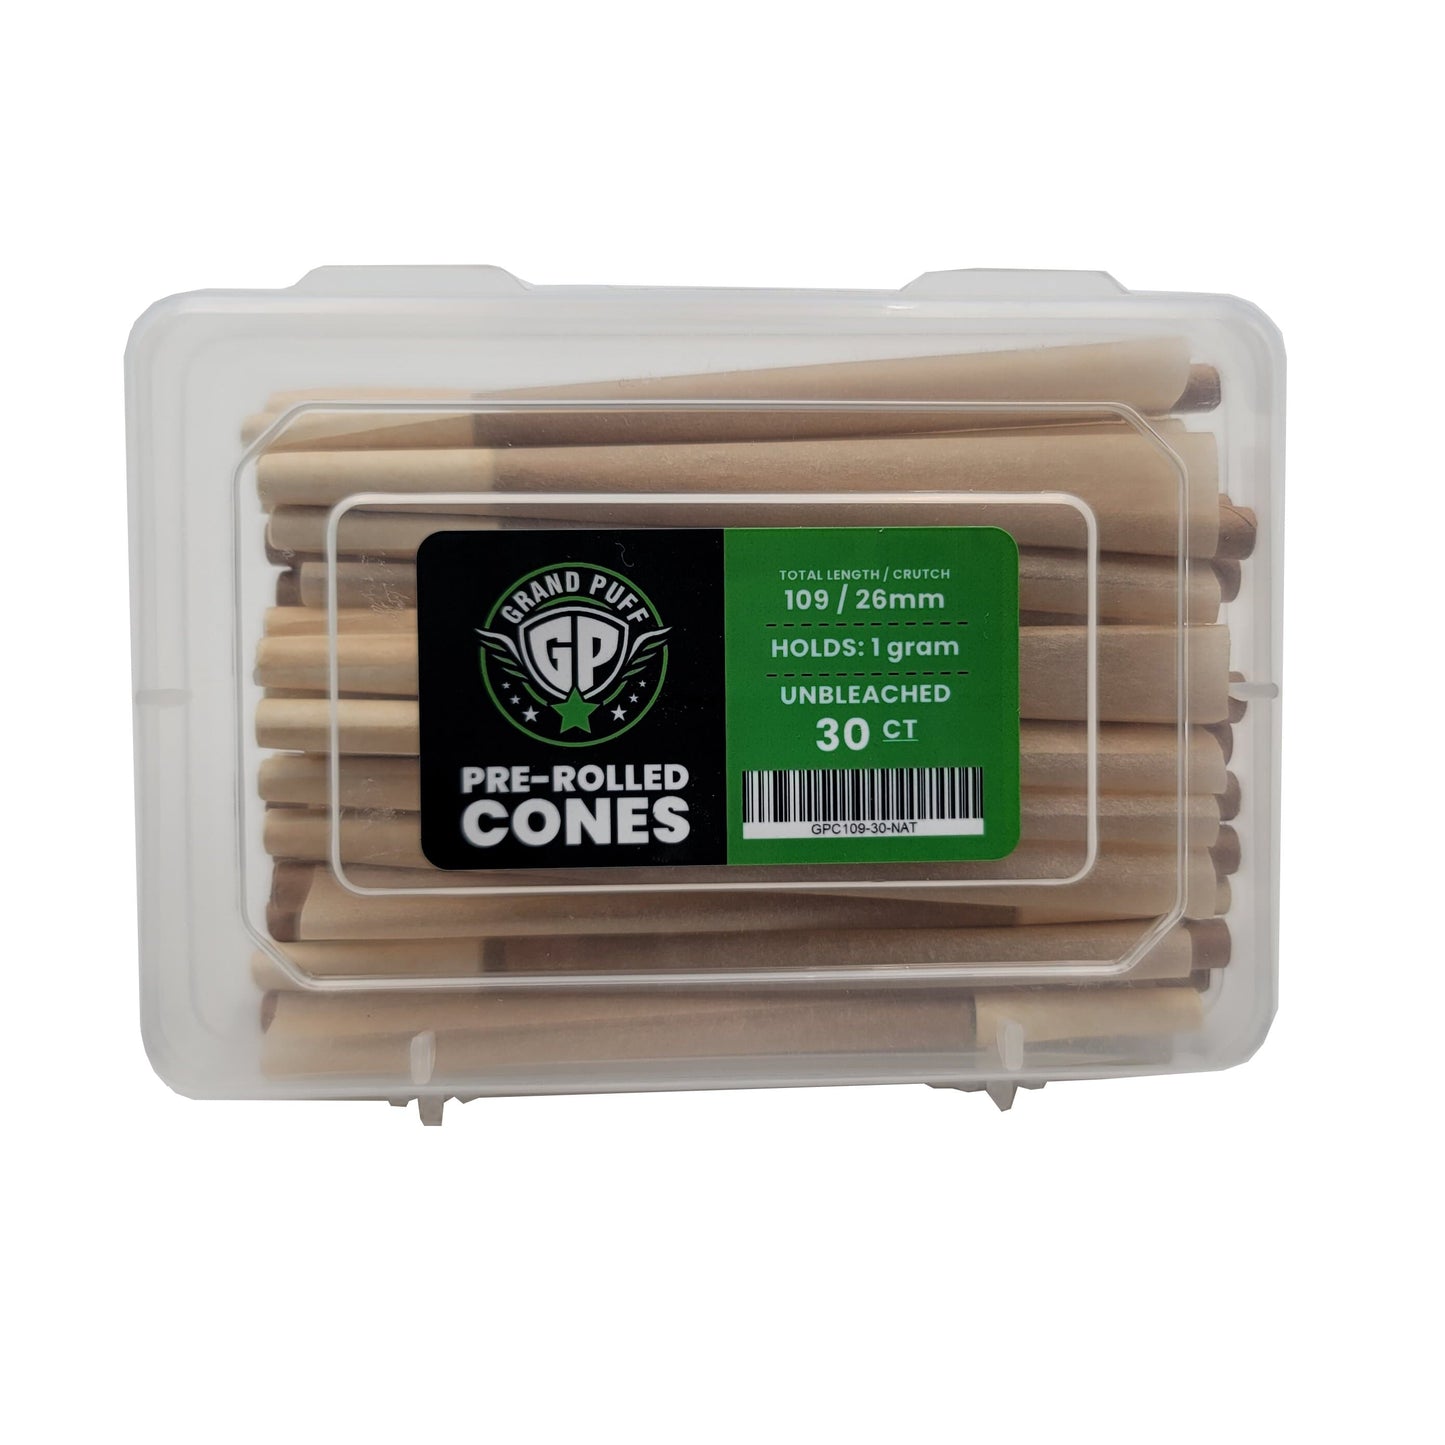 Grand Puff Premium King Size Pre-Roll Cones (109mm / 26mm filter) | Box of 30